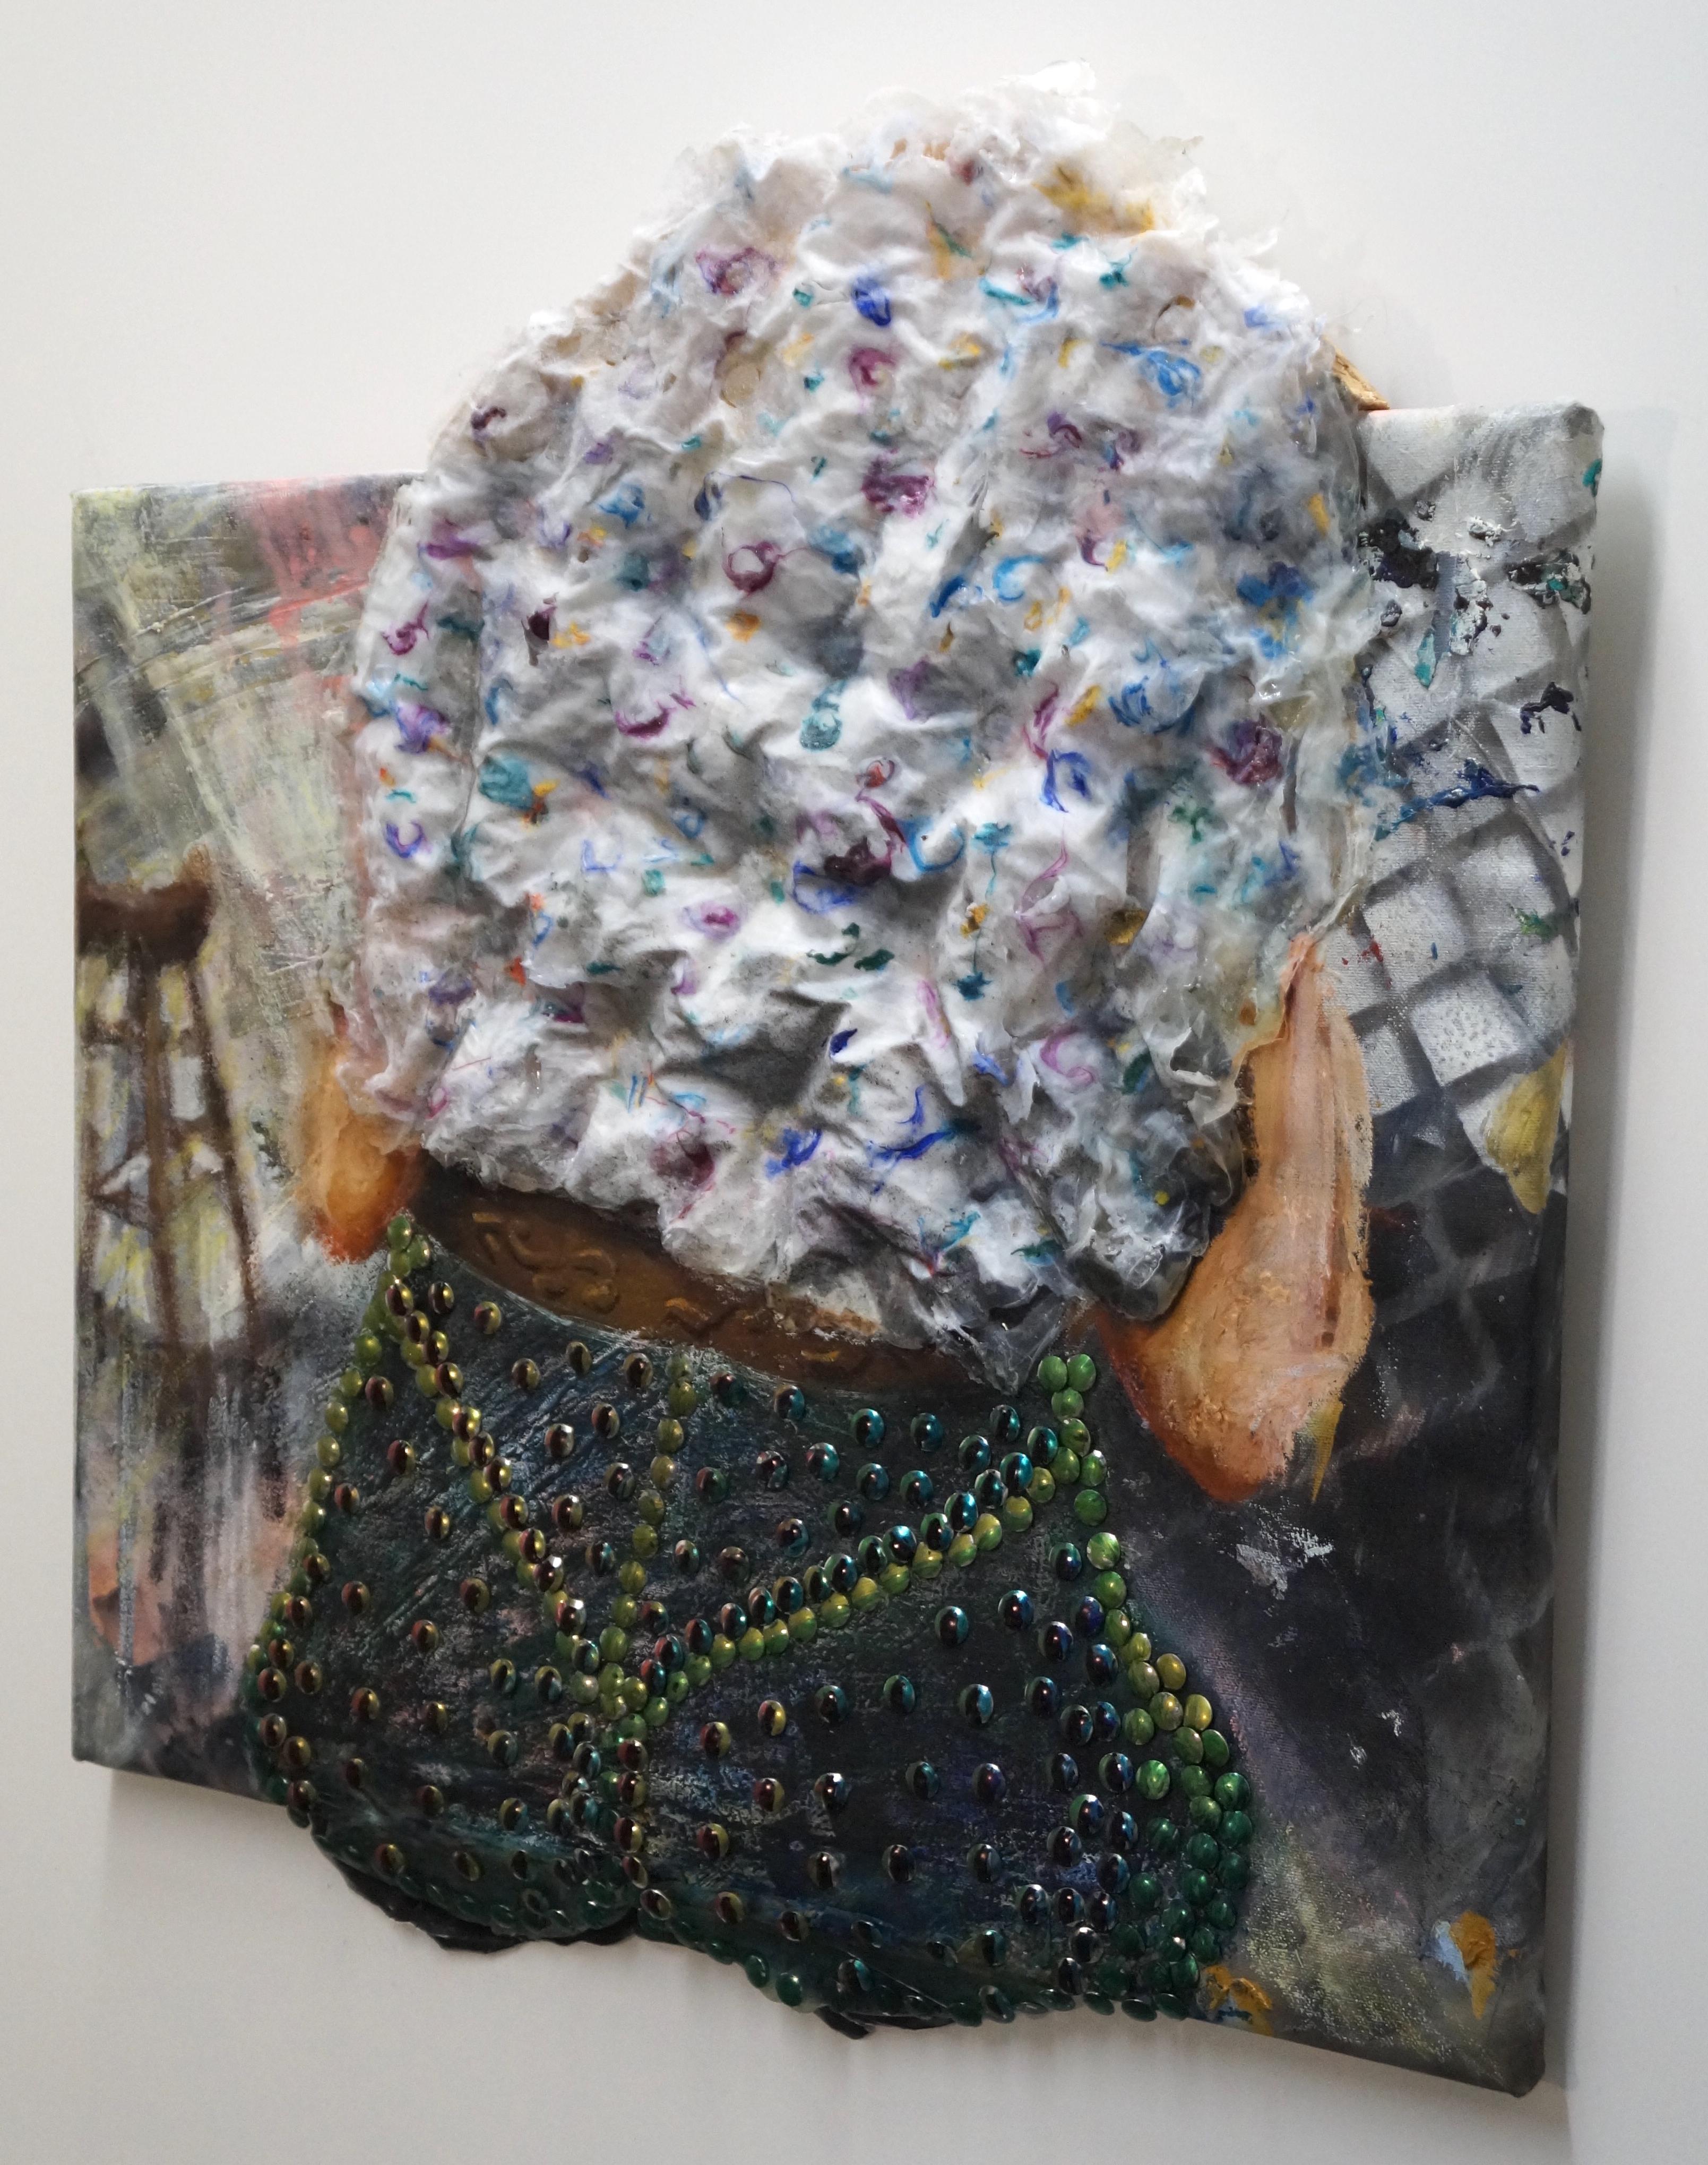 In “Snake Eyes”, Eleanor Aldrich uses oil, silicone, enamel, thumbtacks, and sharpie on canvas to create a visceral exploration into a lounging back.  The mixed-media painting investigates a shirt and jeans through layers of seeping silicone and an